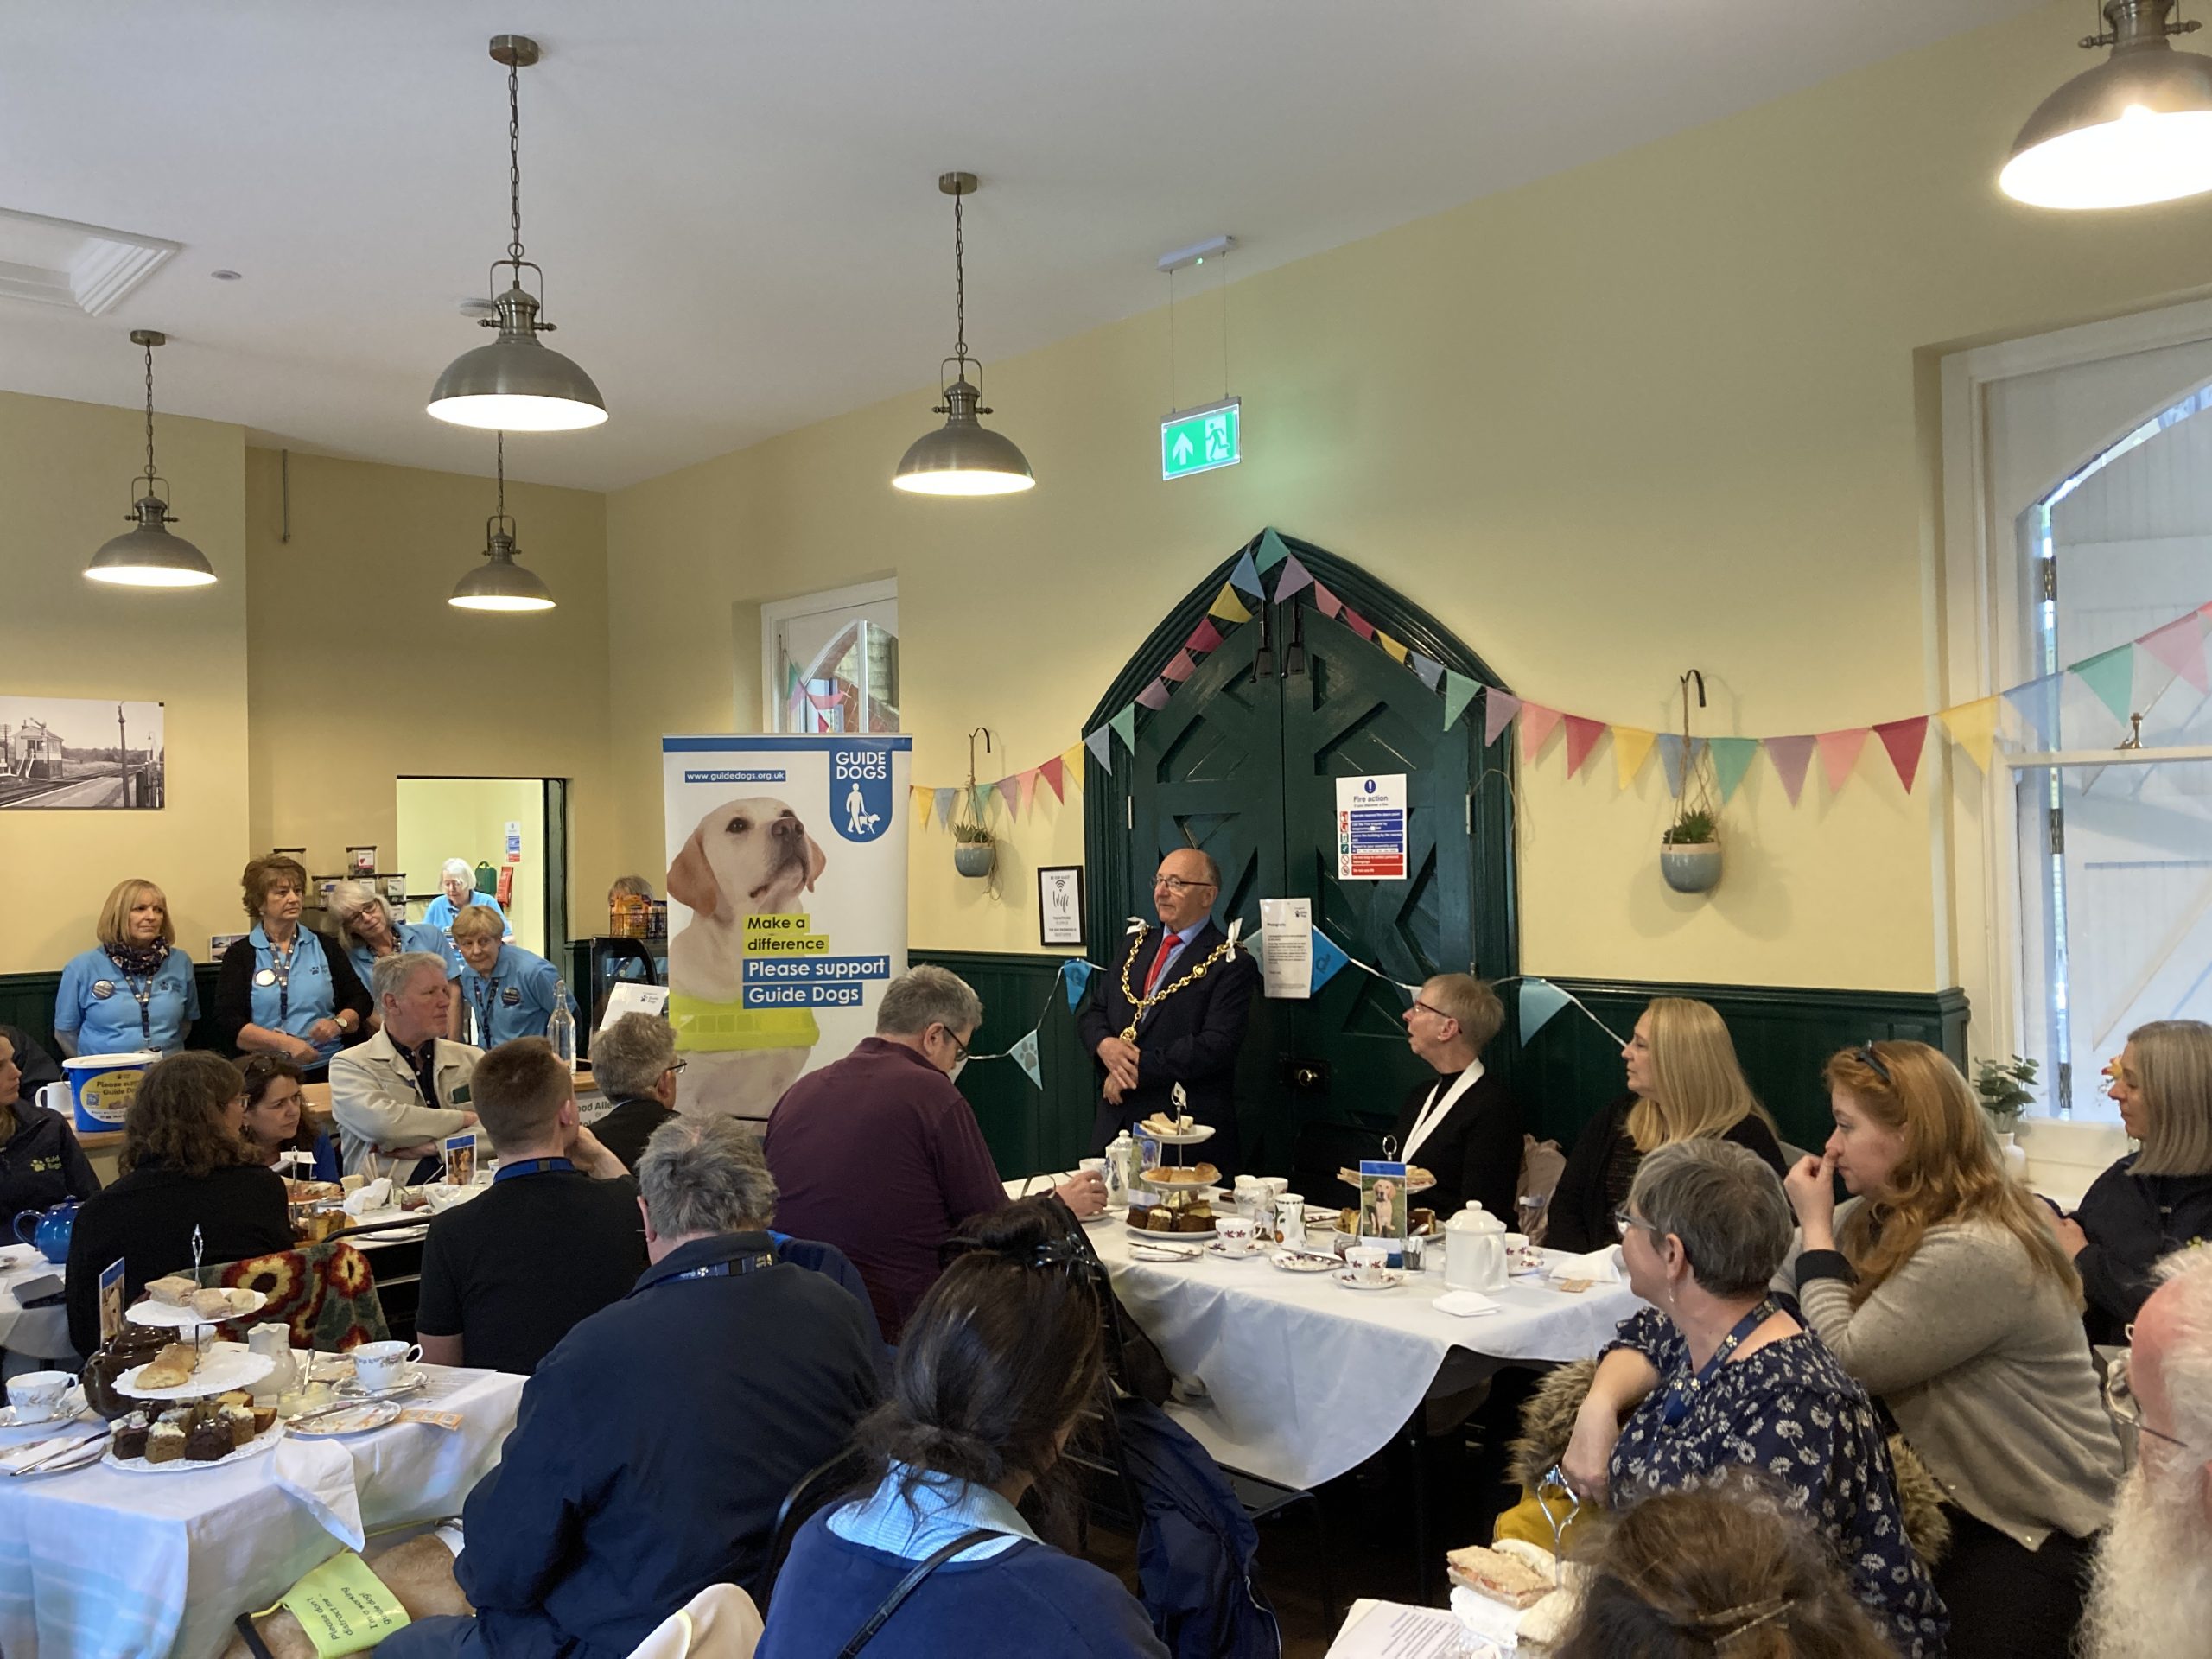 Afternoon tea st out on tables as the Mayor of Maisdstone speaks to the audience of Guide Dogs volunteers, Southeastern managers and other guests